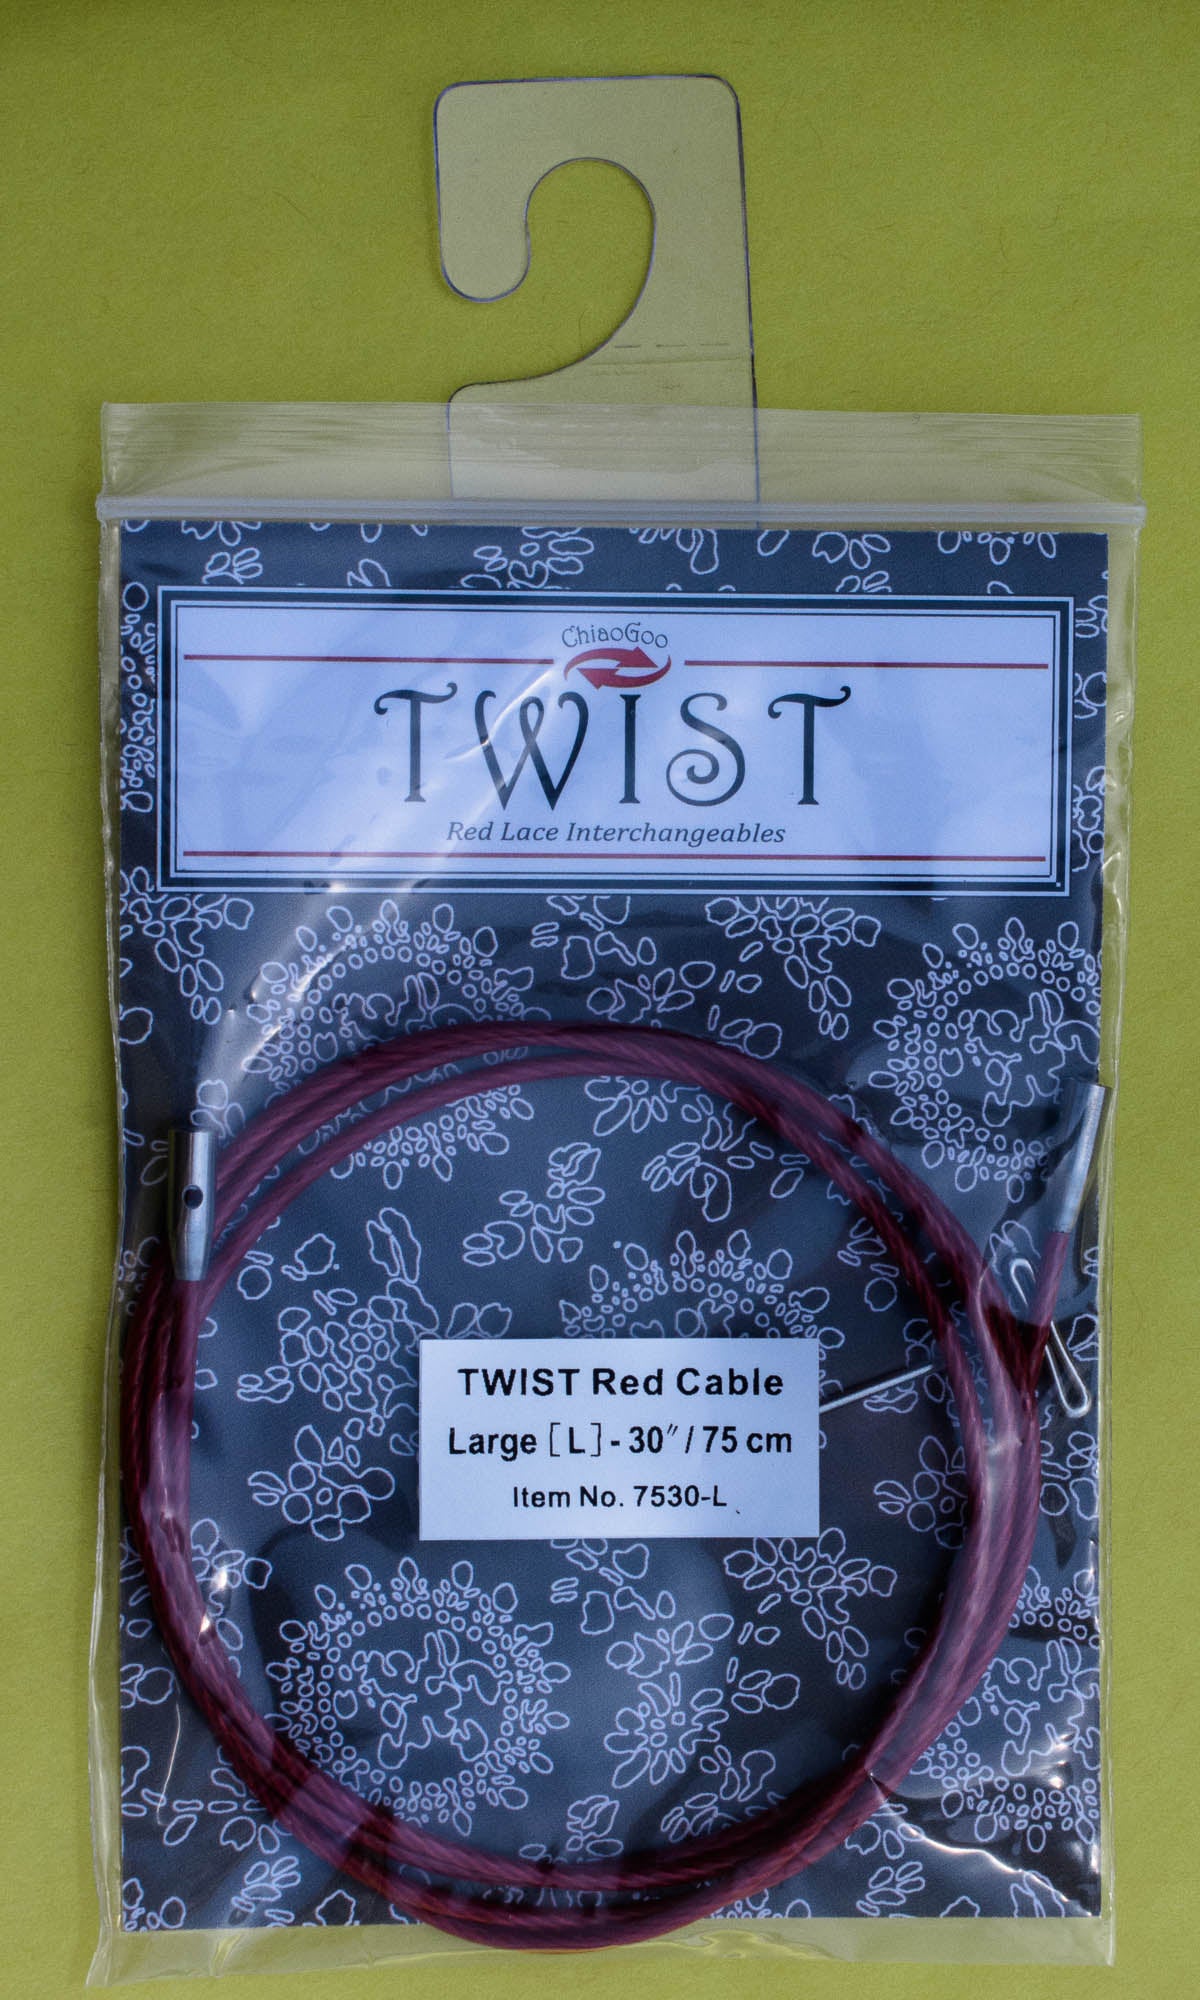 ChiaoGoo TWIST - [L] Large Interchangeable Red Cables - For US-9 (5.5 mm) to US-15 (10 mm) Tips